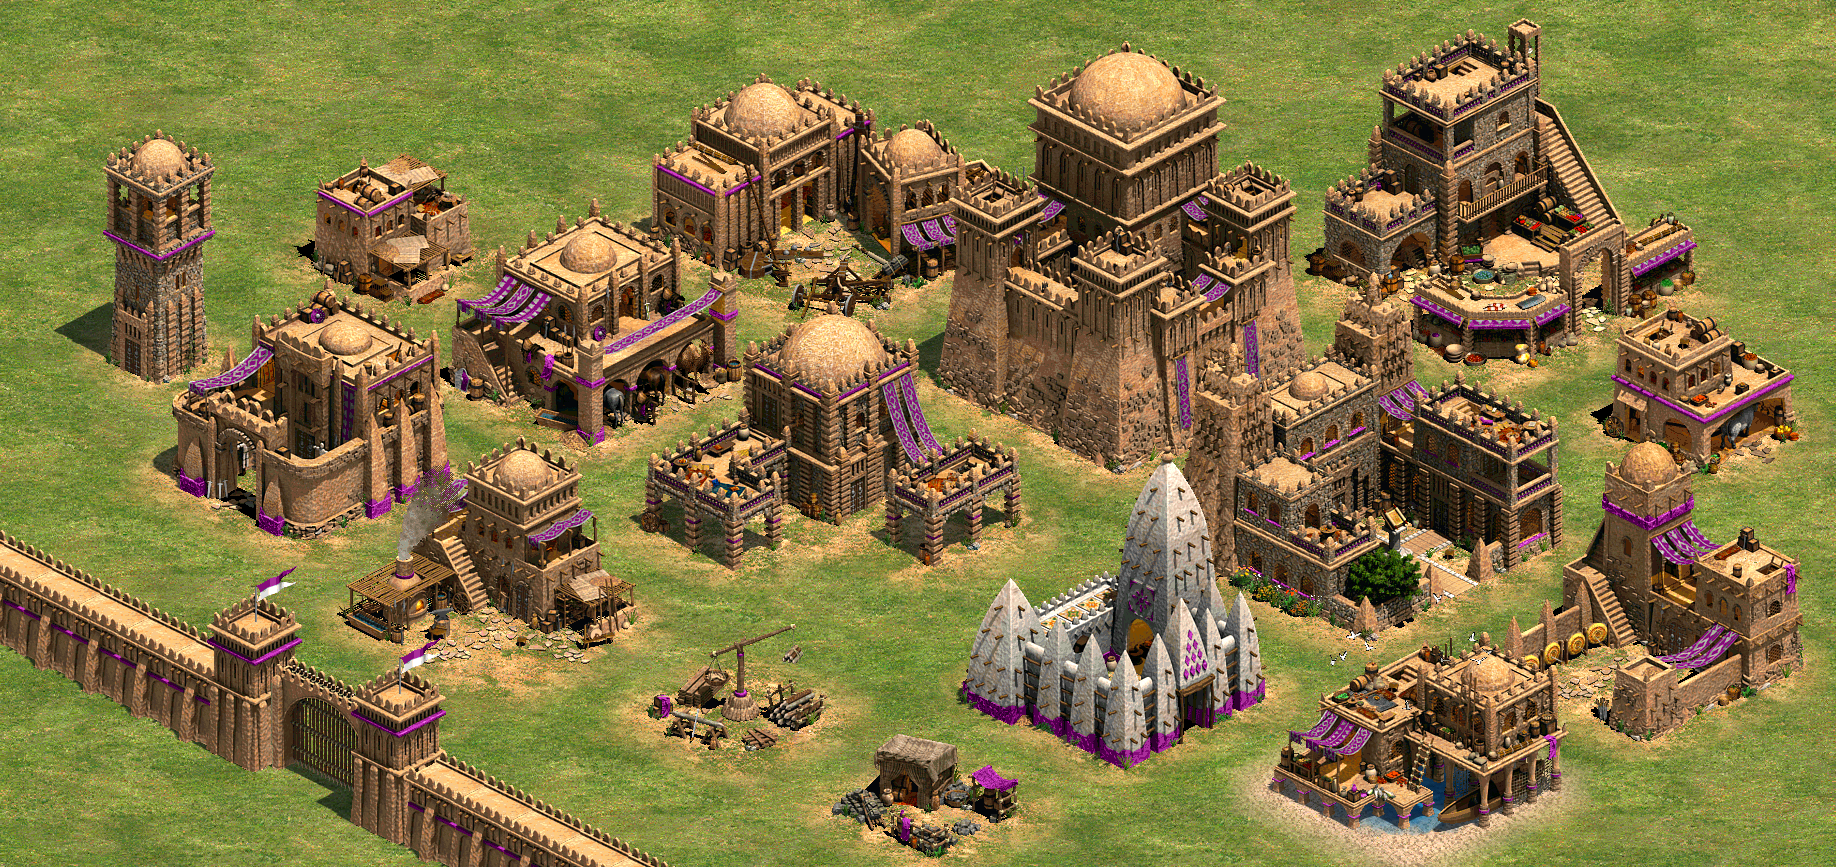 age of empires 3 wikia